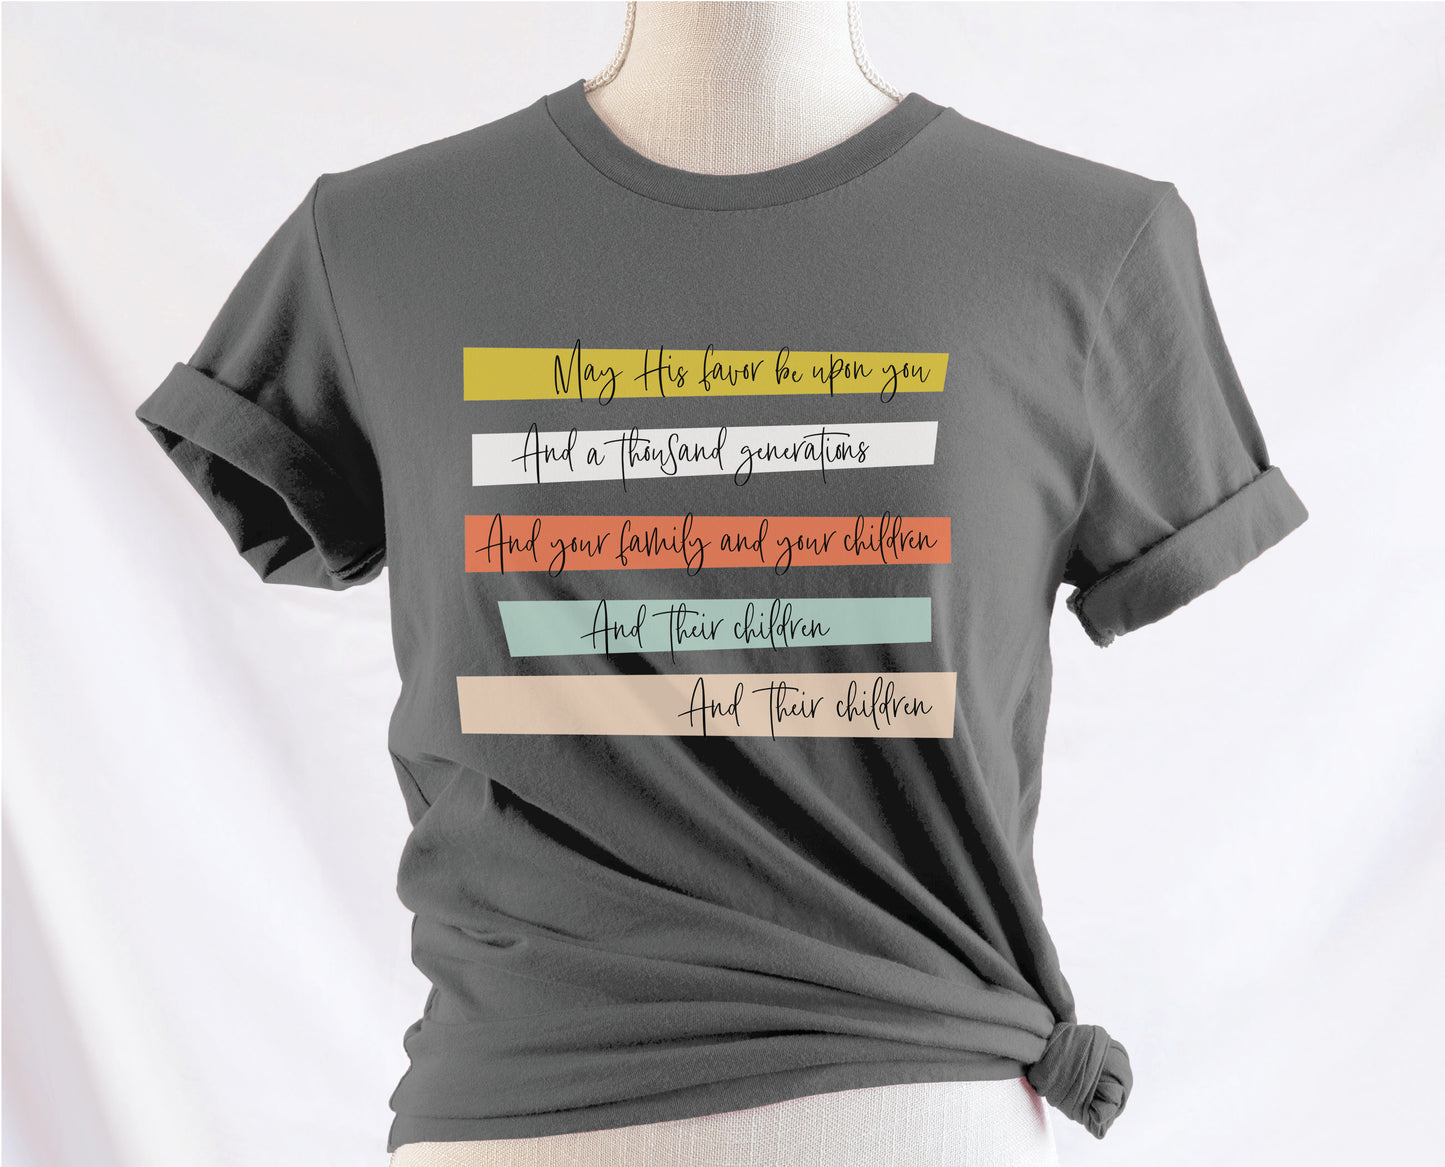 May His Favor Be Upon You and a thousand generations The Family and children Blessing Christian aesthetic 5 bars design printed on soft asphalt gray t-shirt for women